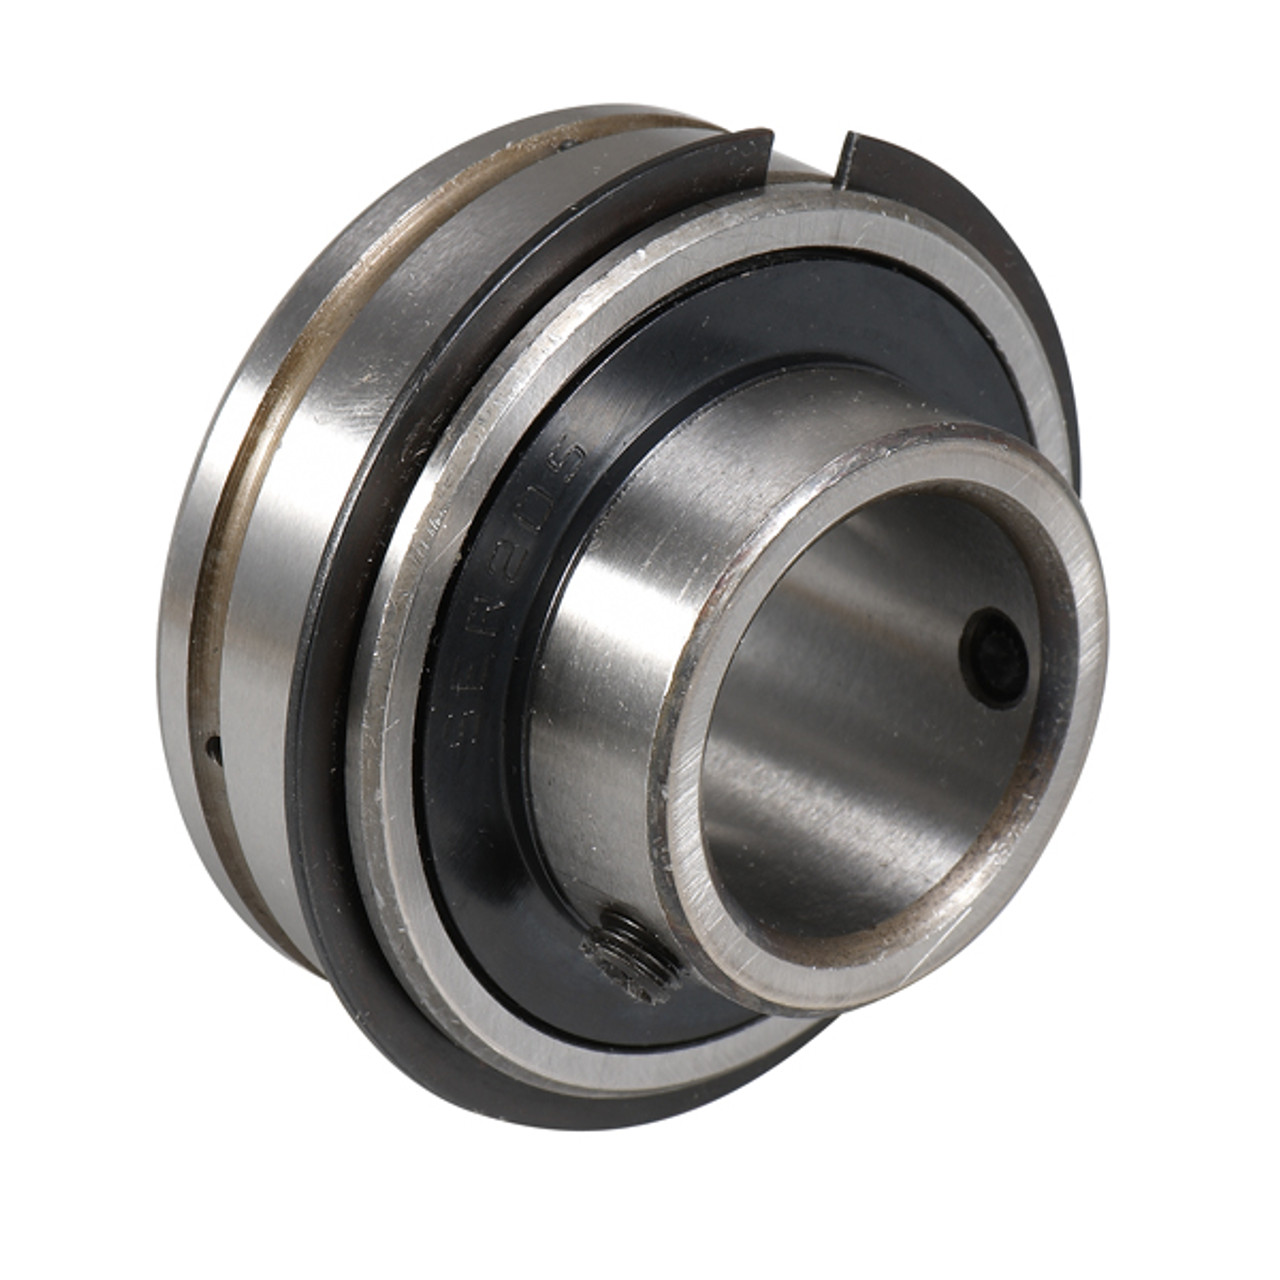 SER206-19 GENERIC 30.1625mm Normal duty bearing insert with a parallel outer race and grubscrew locking - Imperial Thumbnail